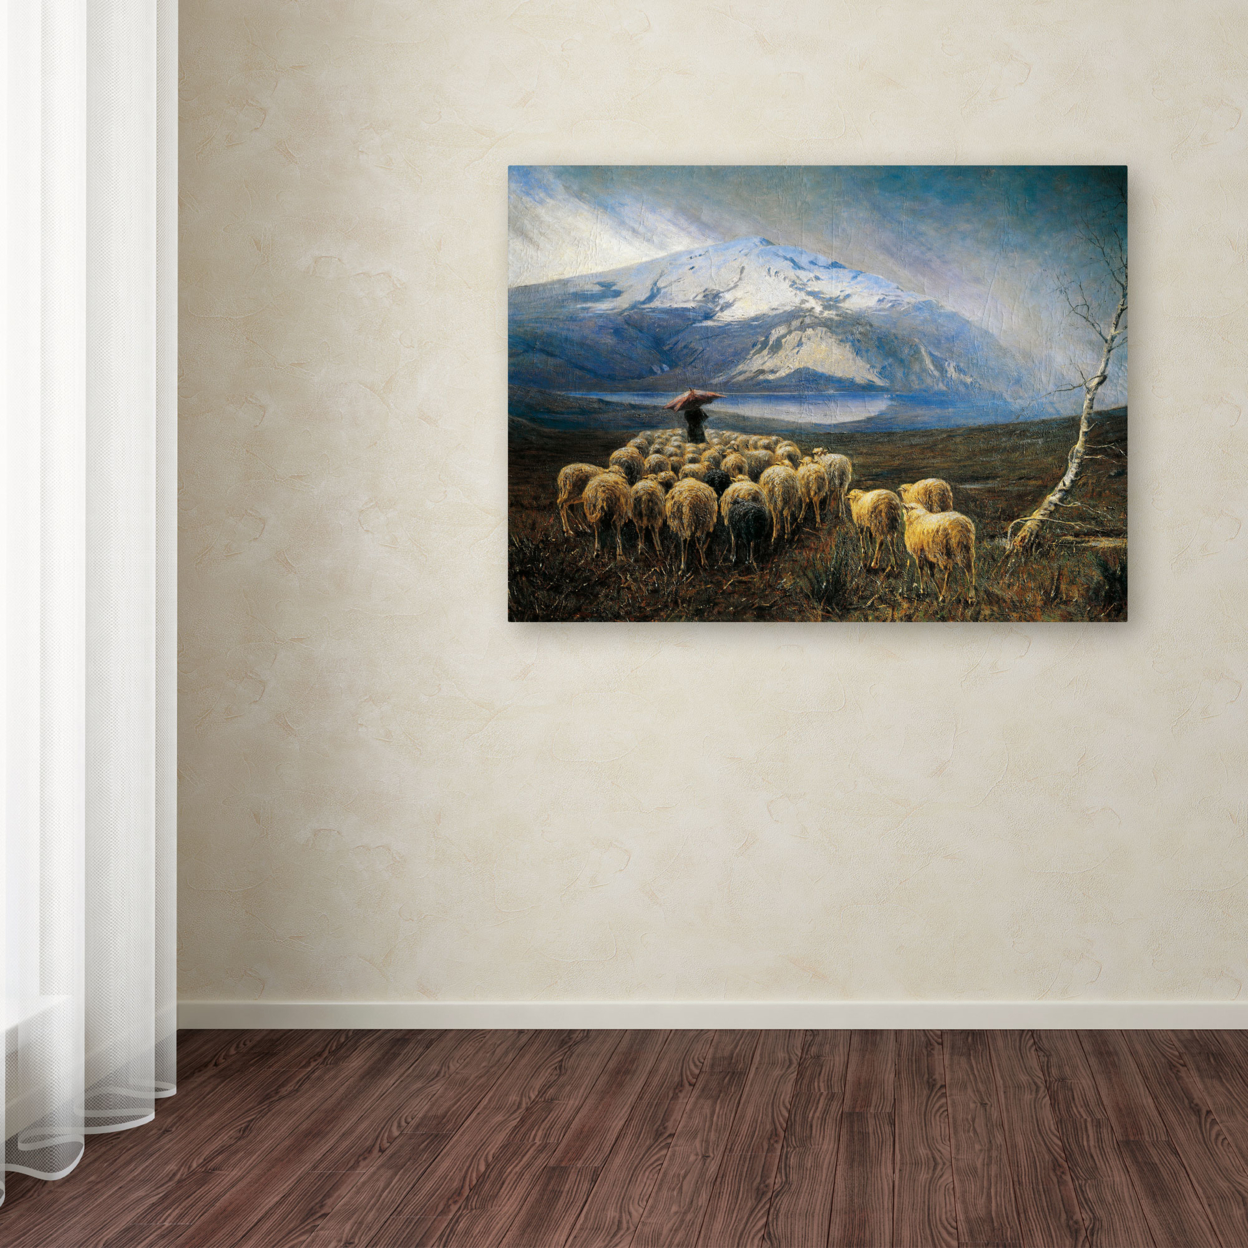 Achilles Tominetti 'Mountain Landscape With Rain' Canvas Wall Art 35 X 47 Inches